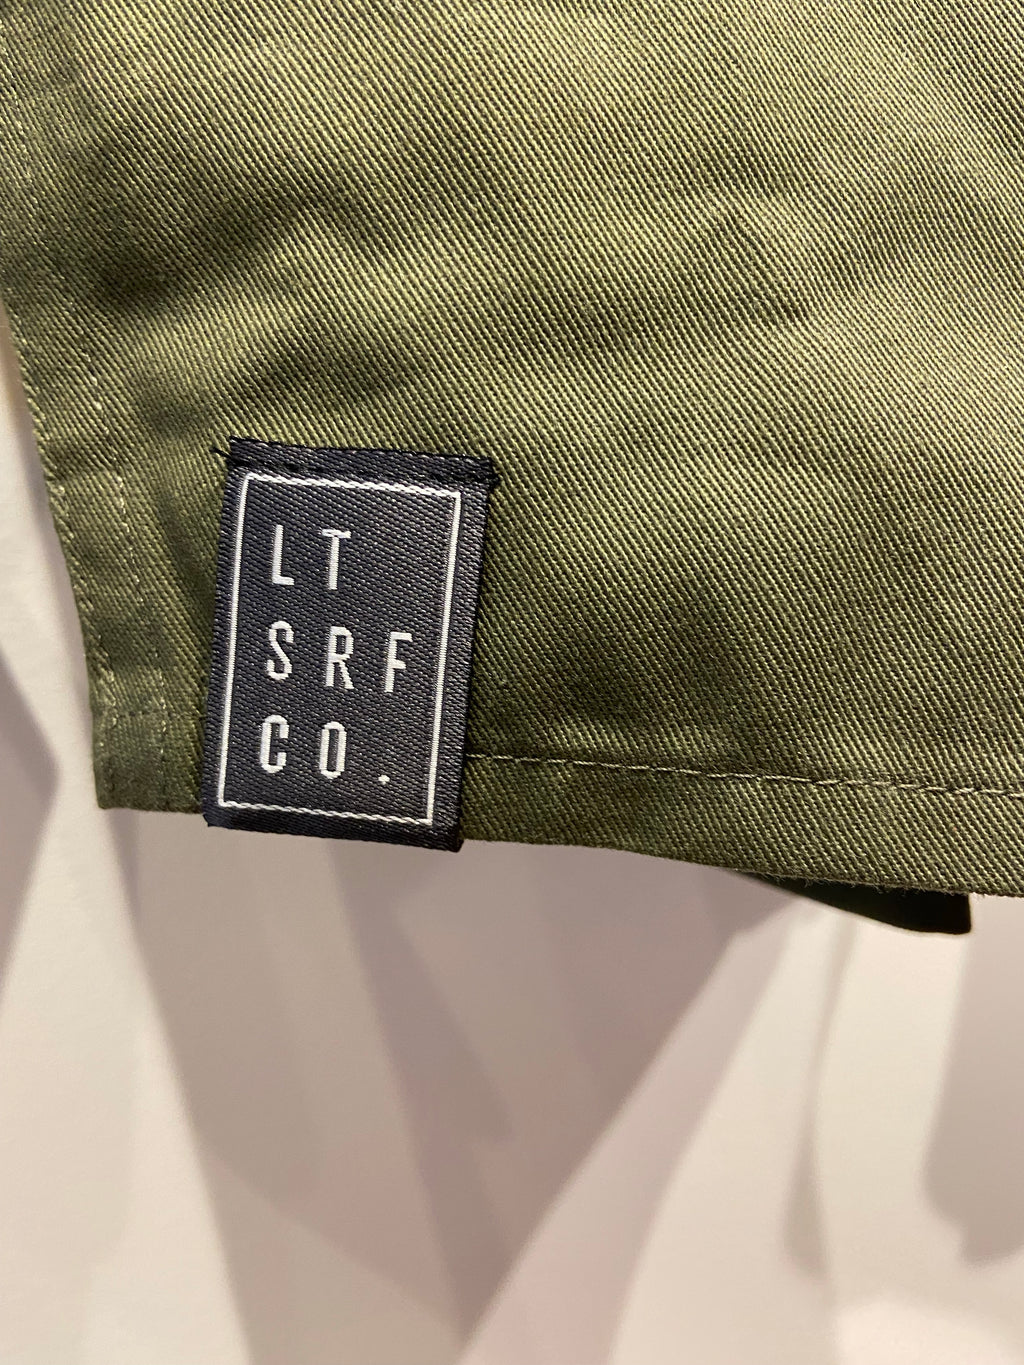 LTSC Military Button Up